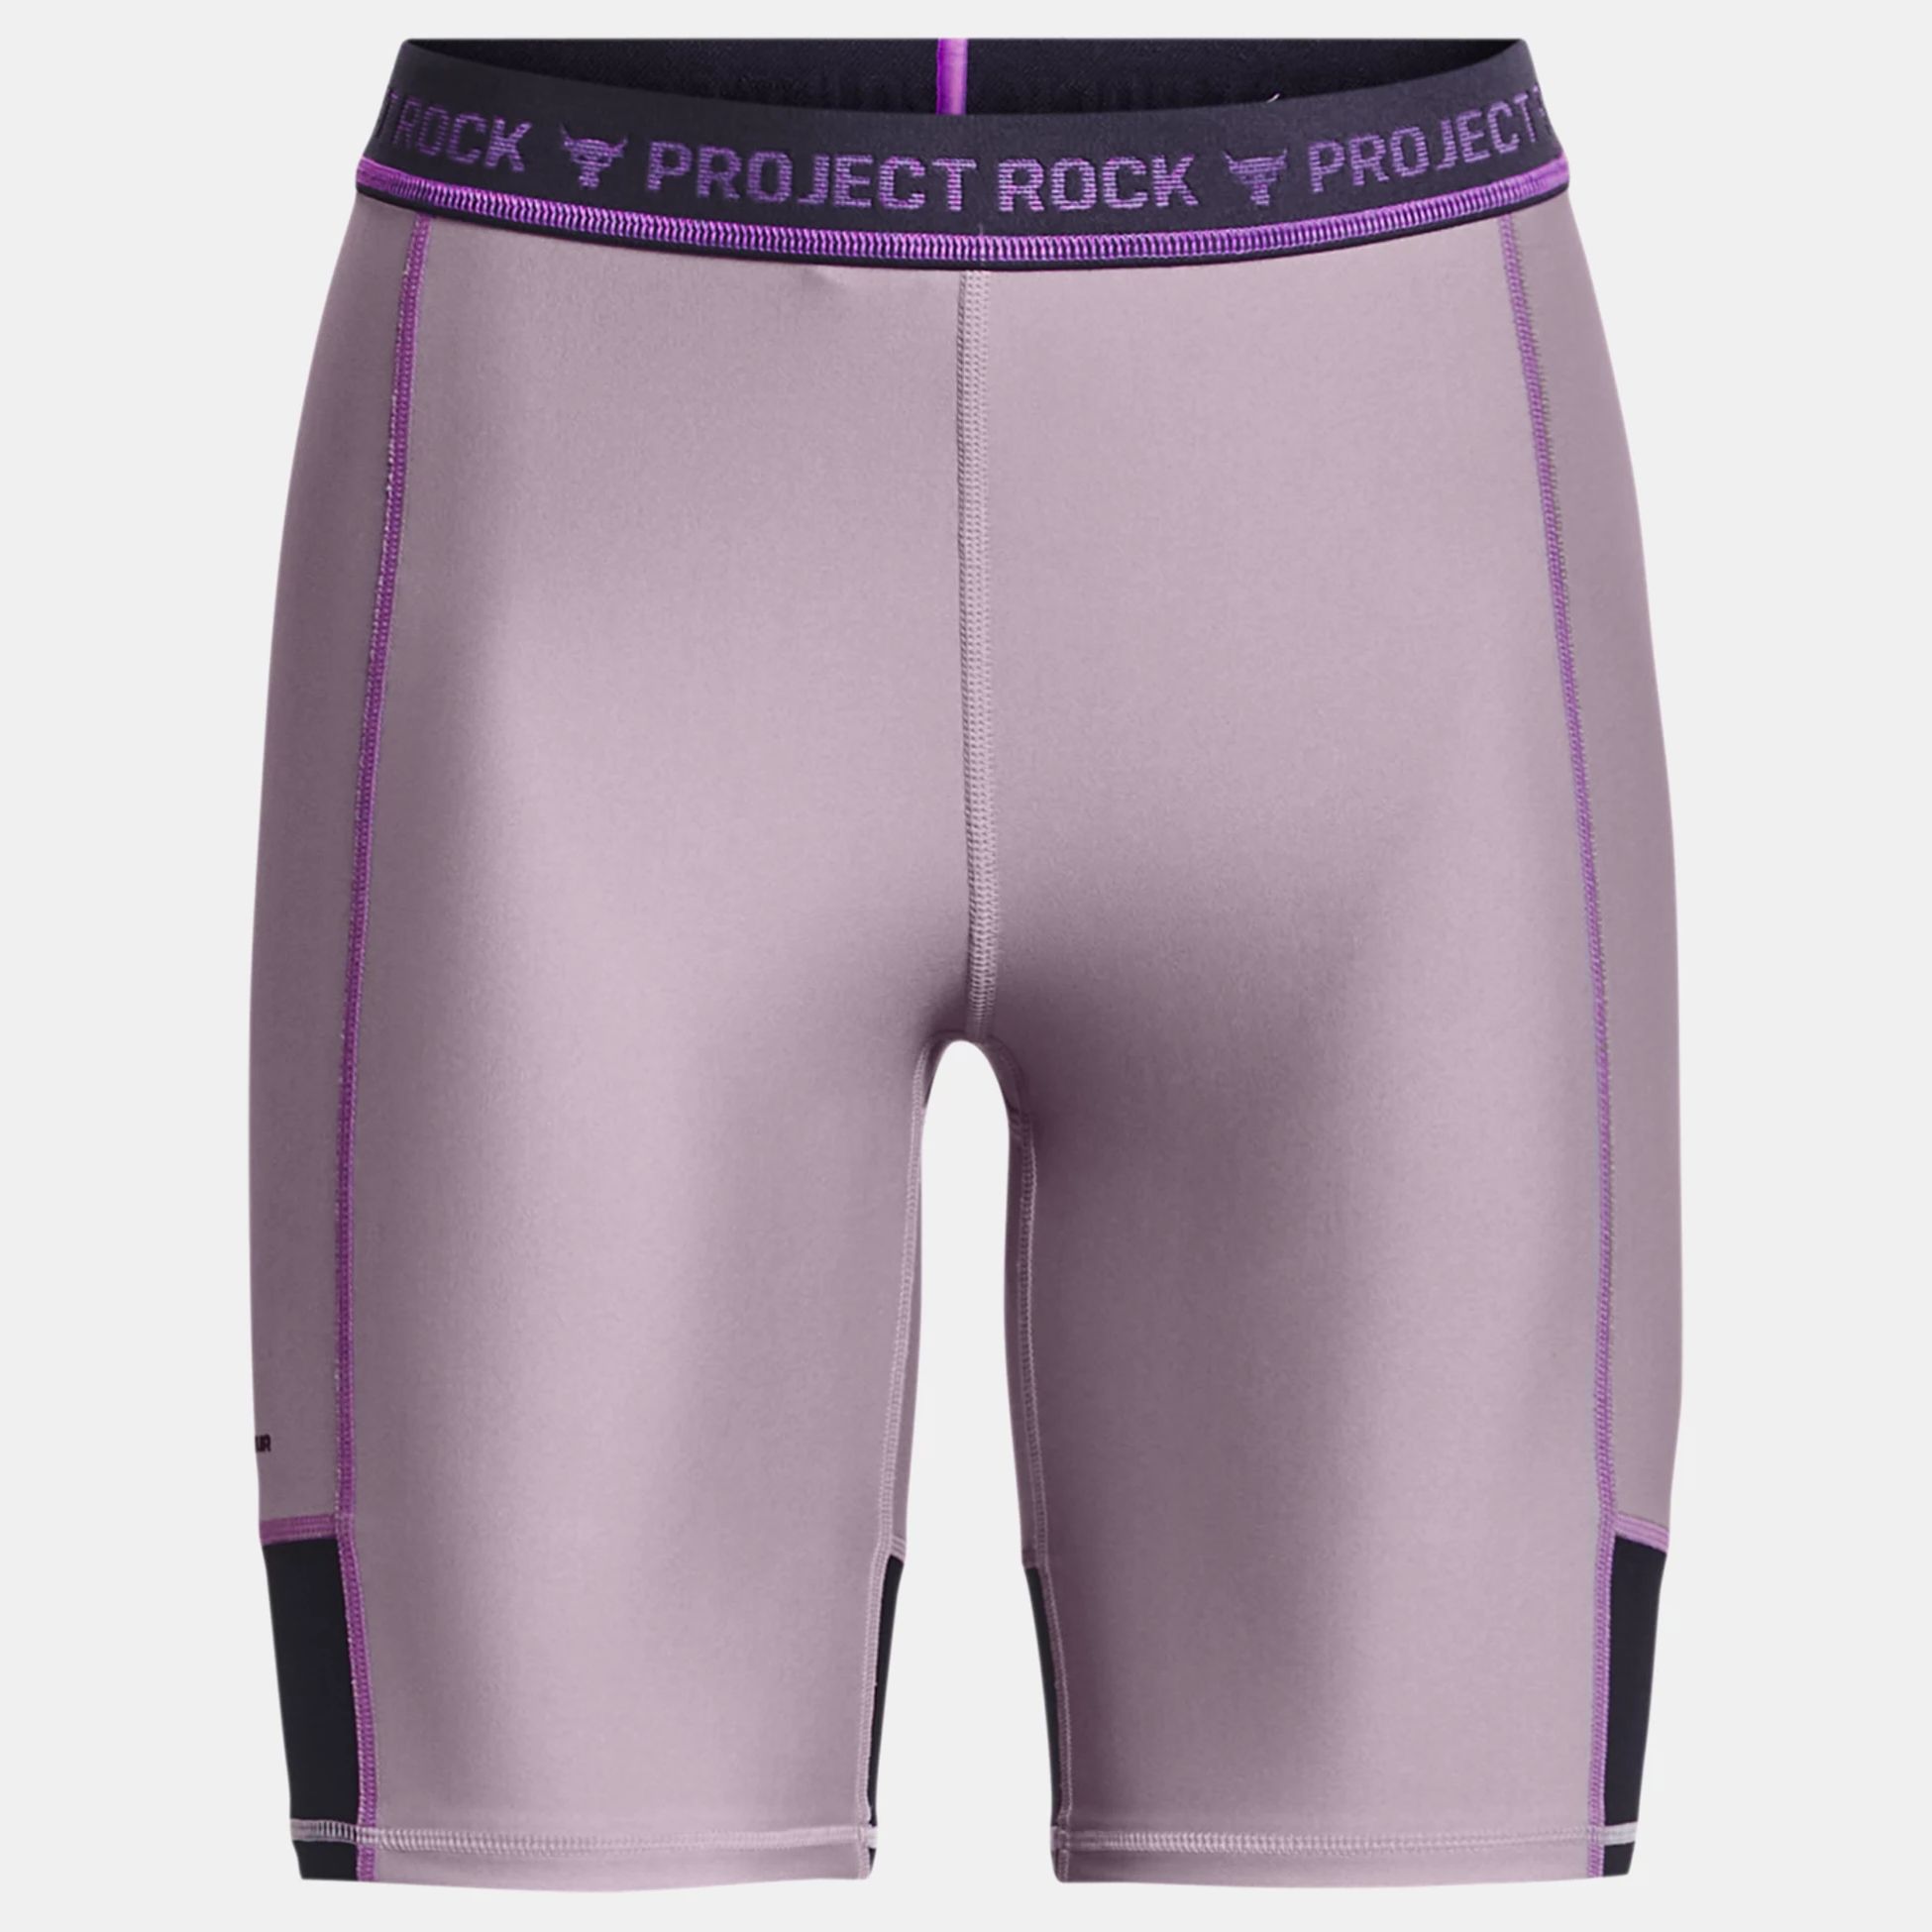 Leggings & Tights -  under armour Project Rock Bike Shorts